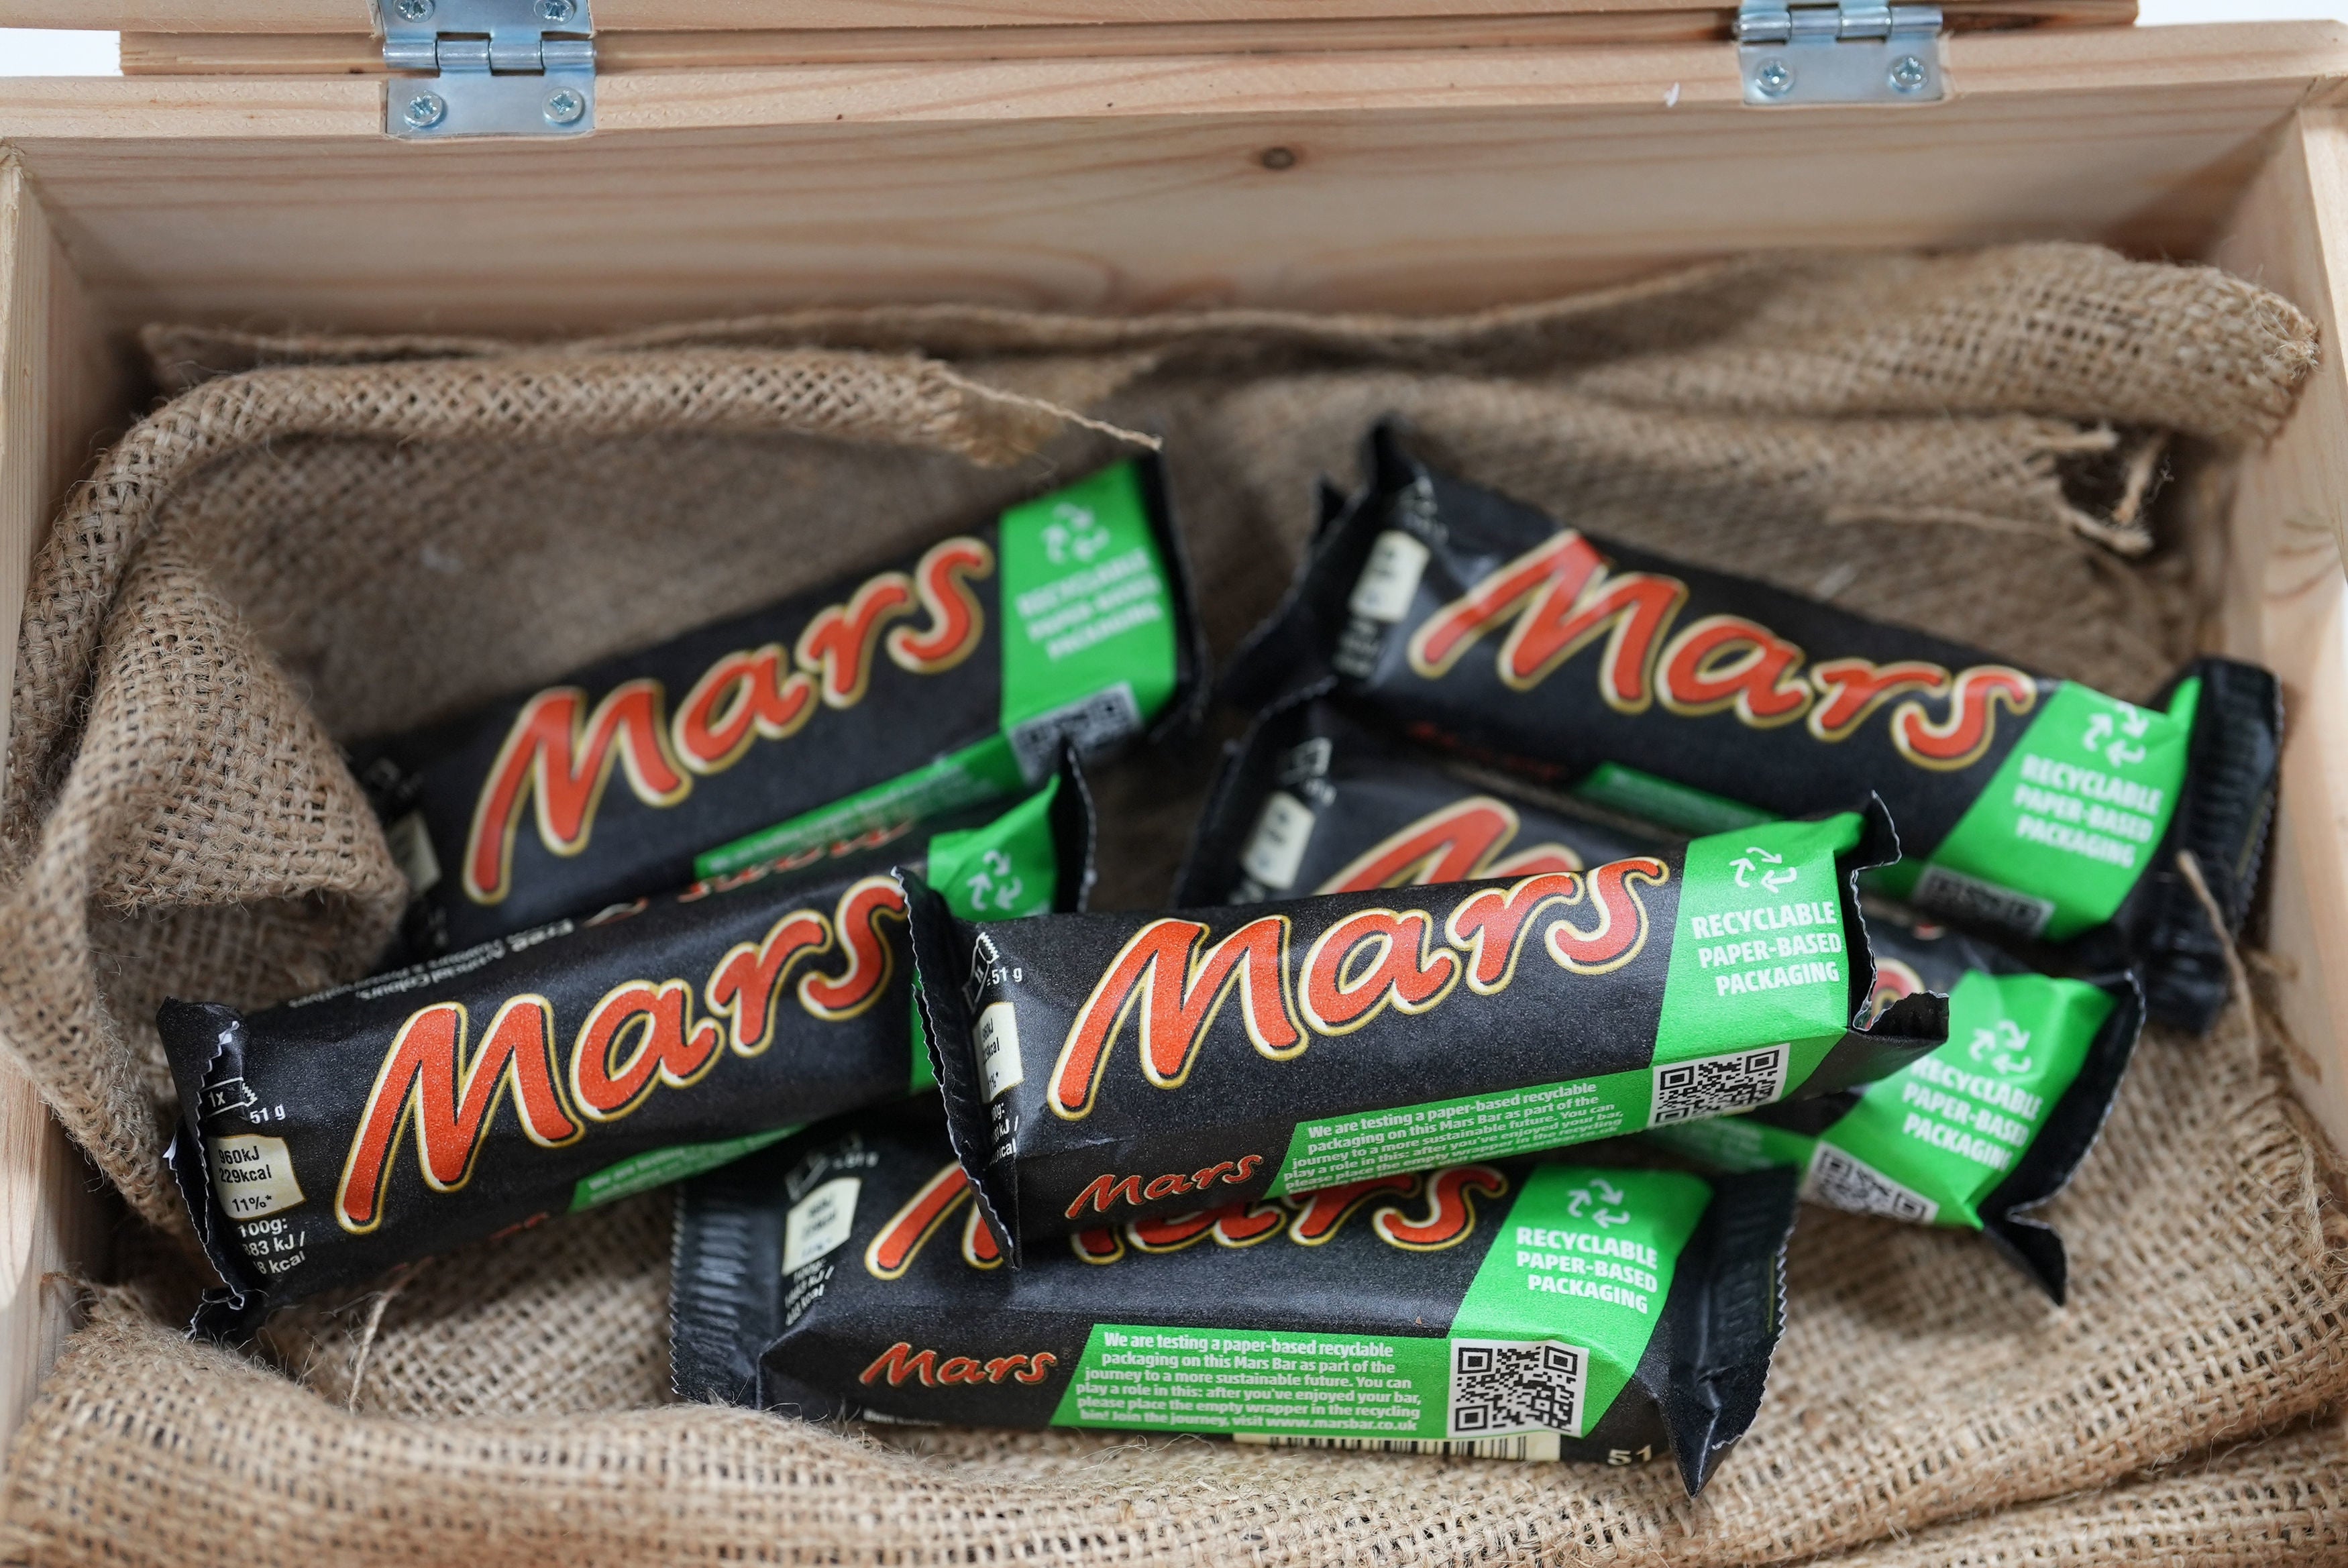 The move comes after development work and investments, with the trial achieving a reduction in plastic on the chocolate bar wrapper